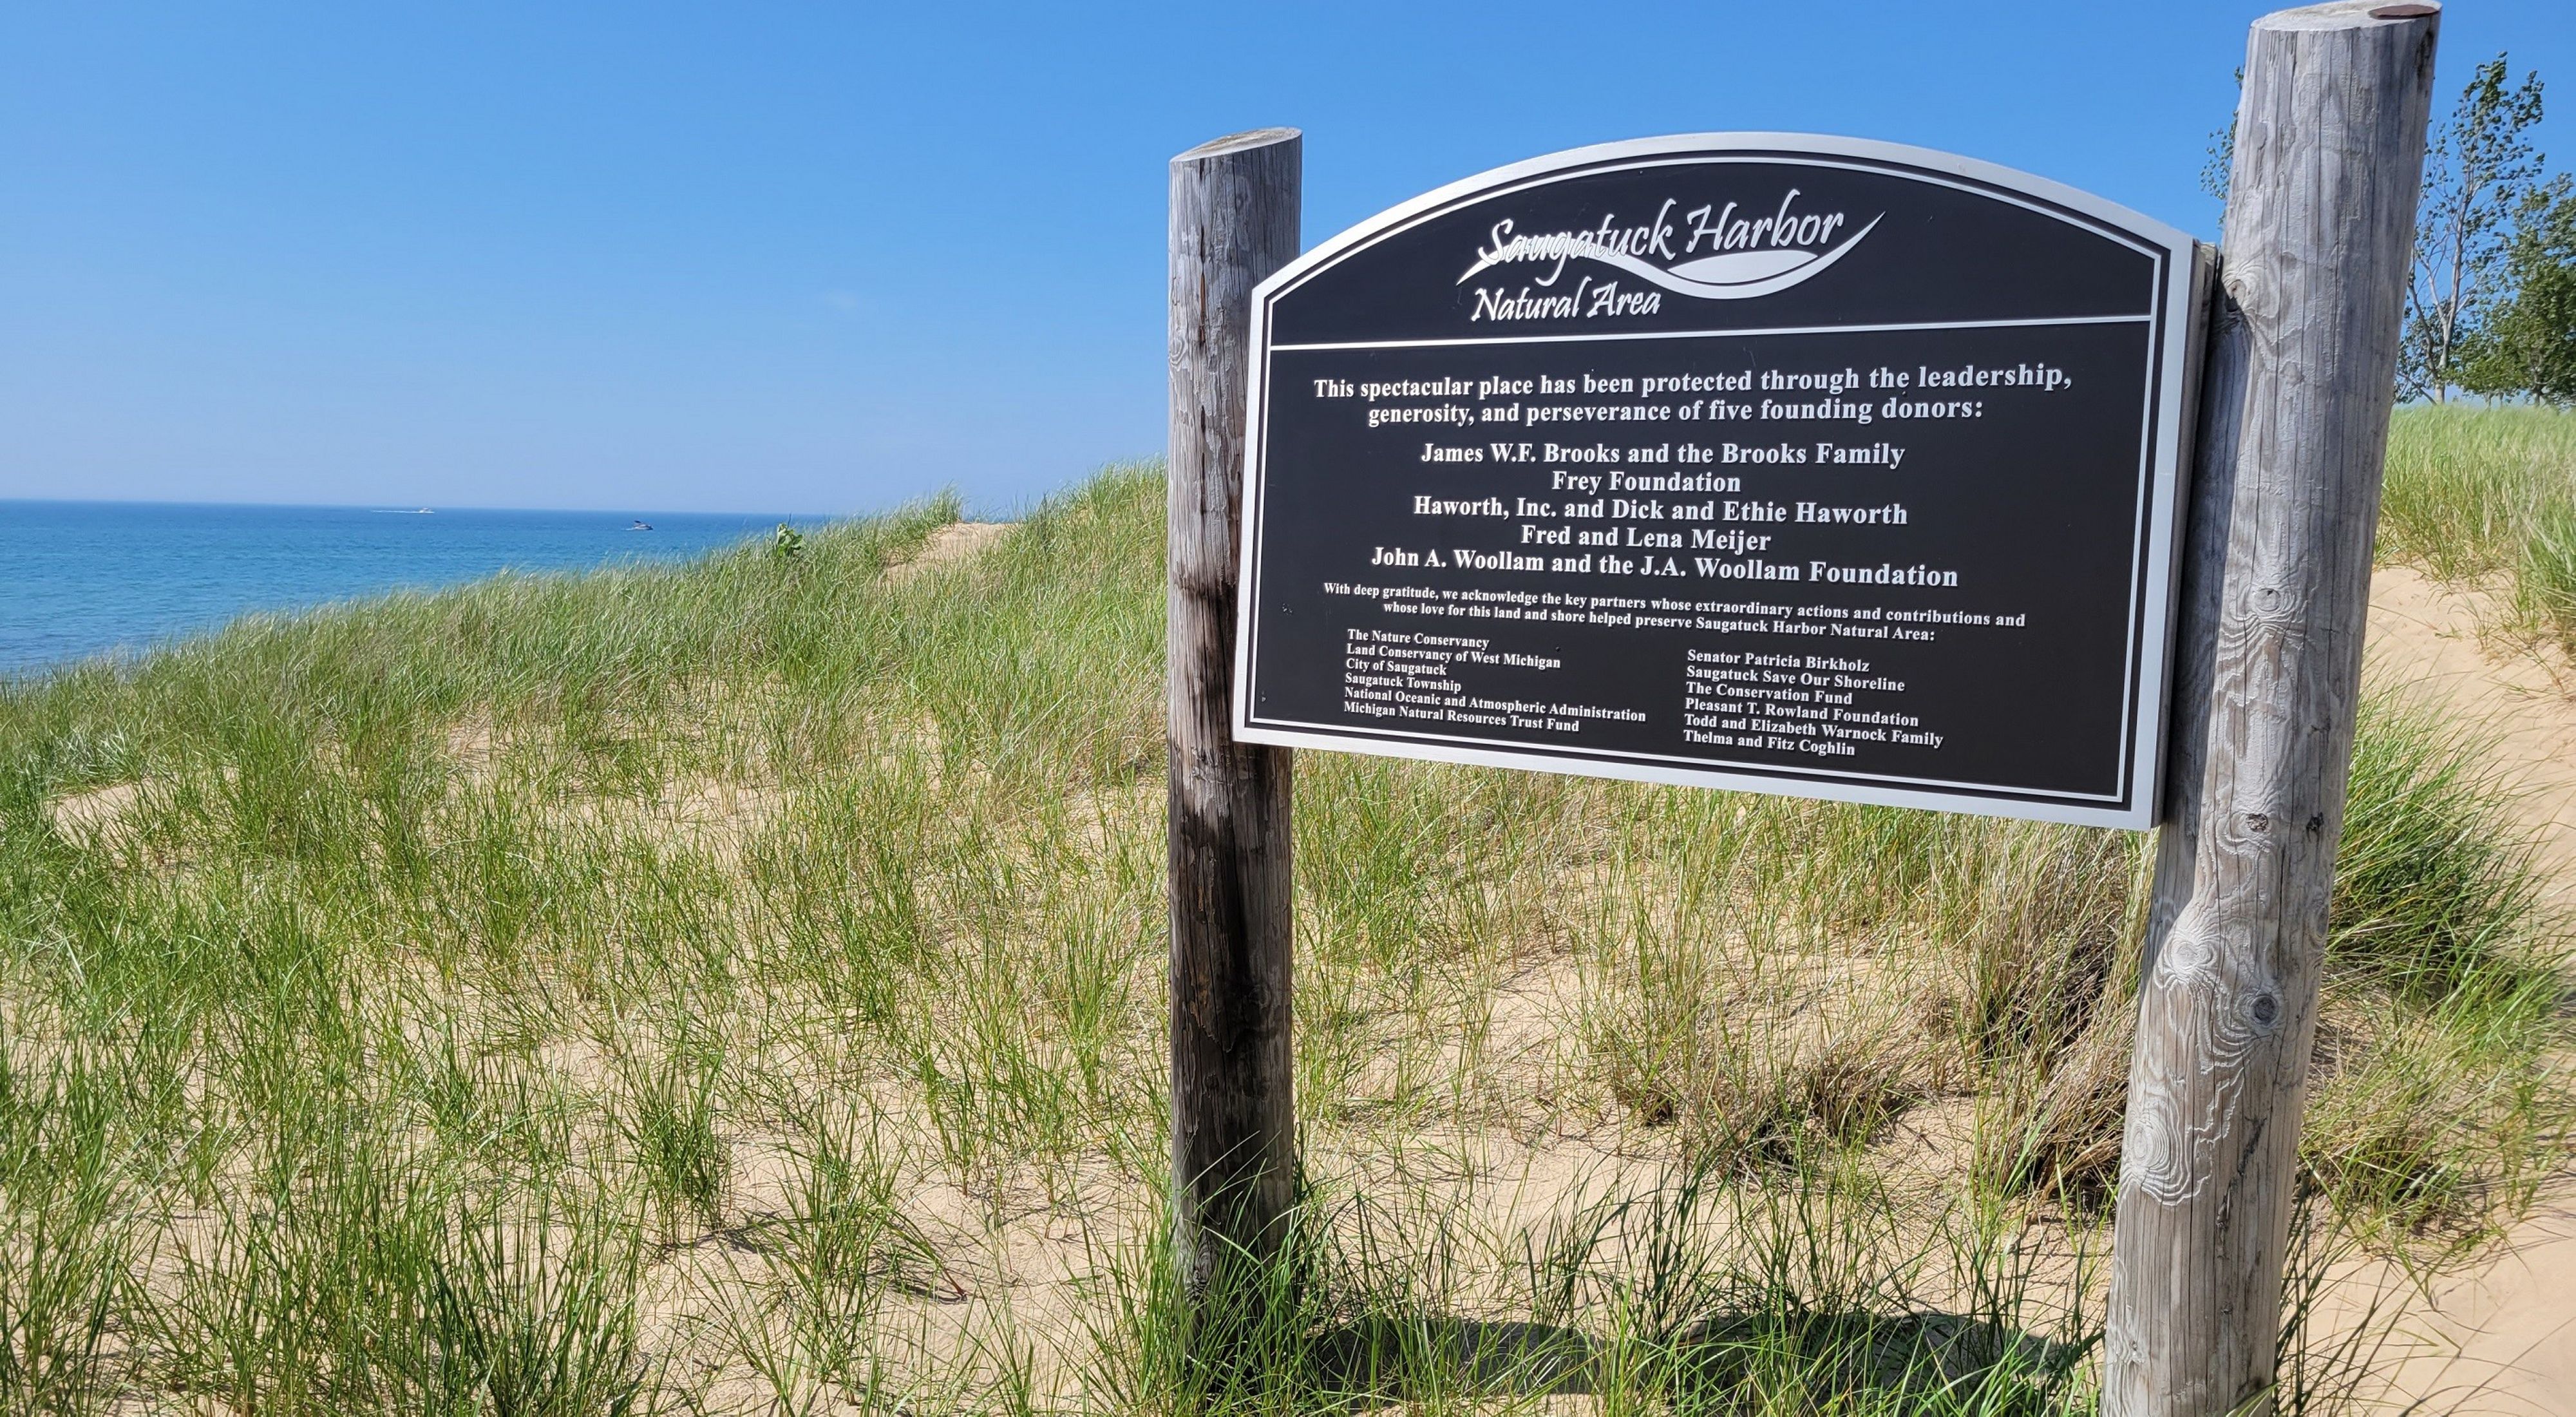 A sign for Saugatuck Harbor Natural Area stands in a grassy, sandy area. 